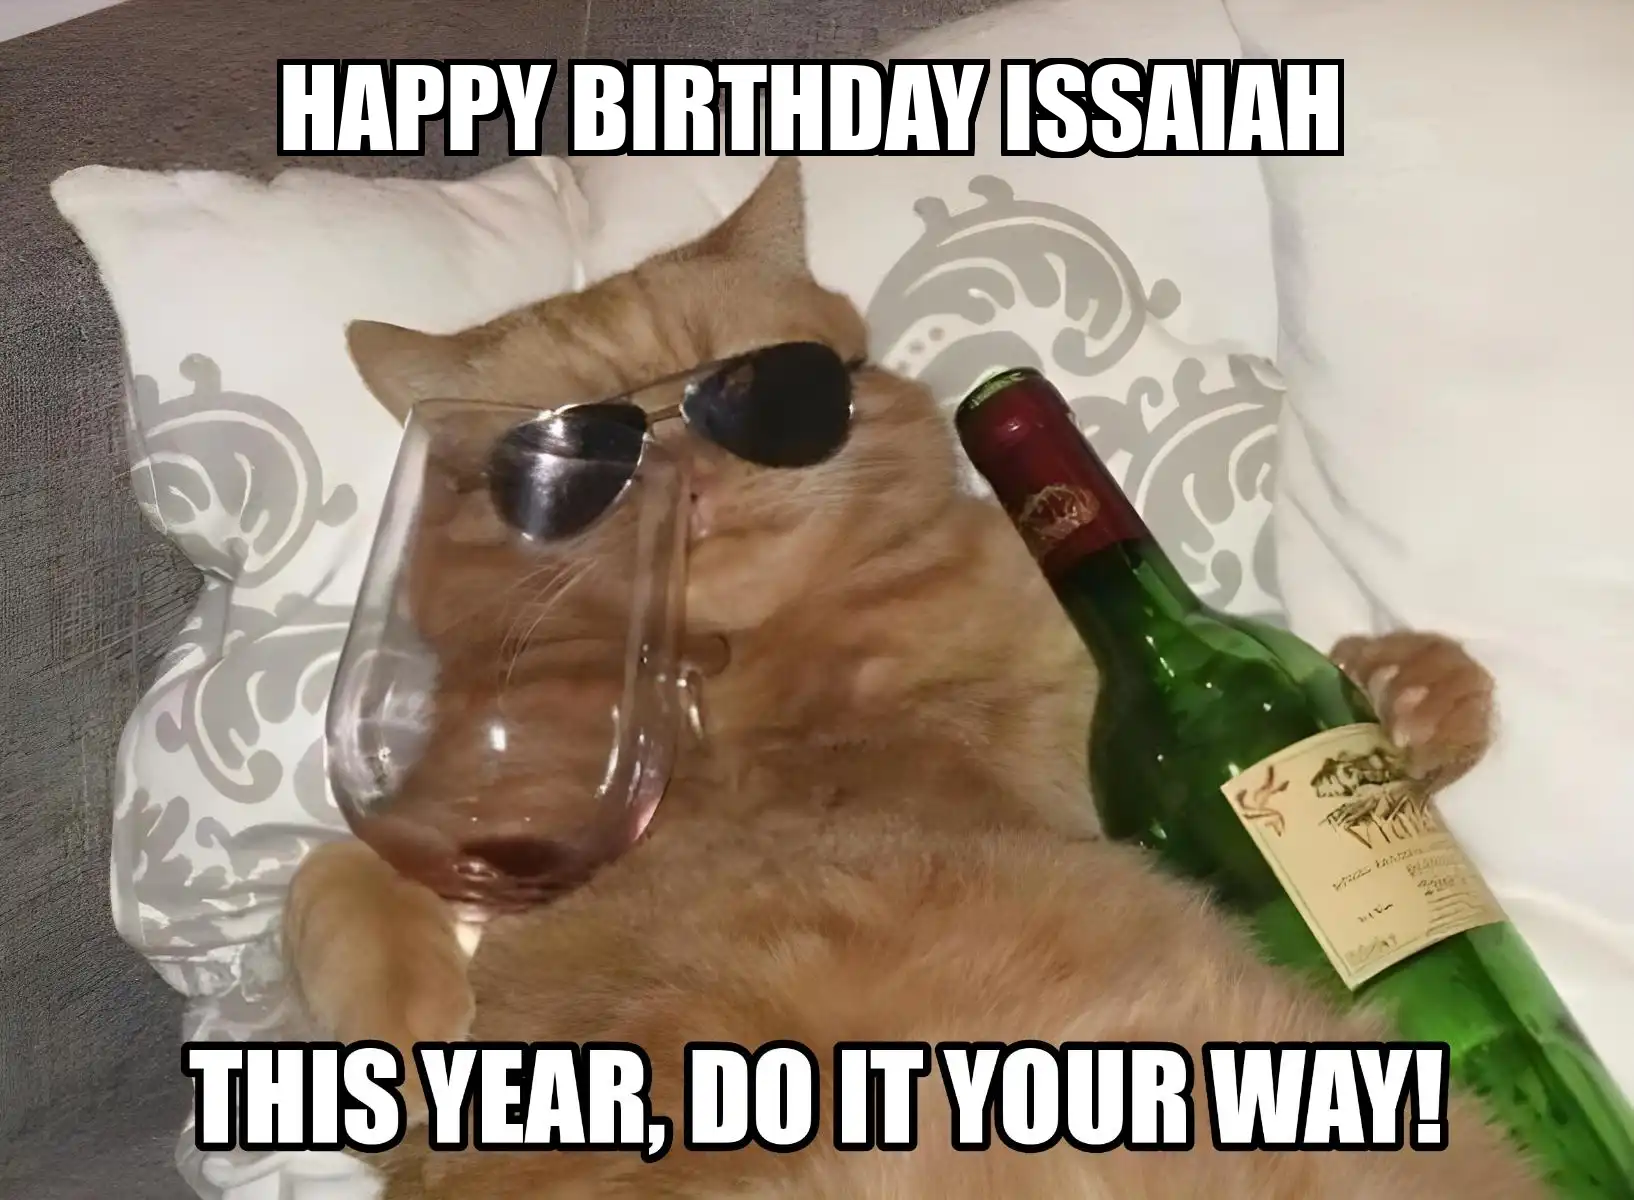 Happy Birthday Issaiah This Year Do It Your Way Meme